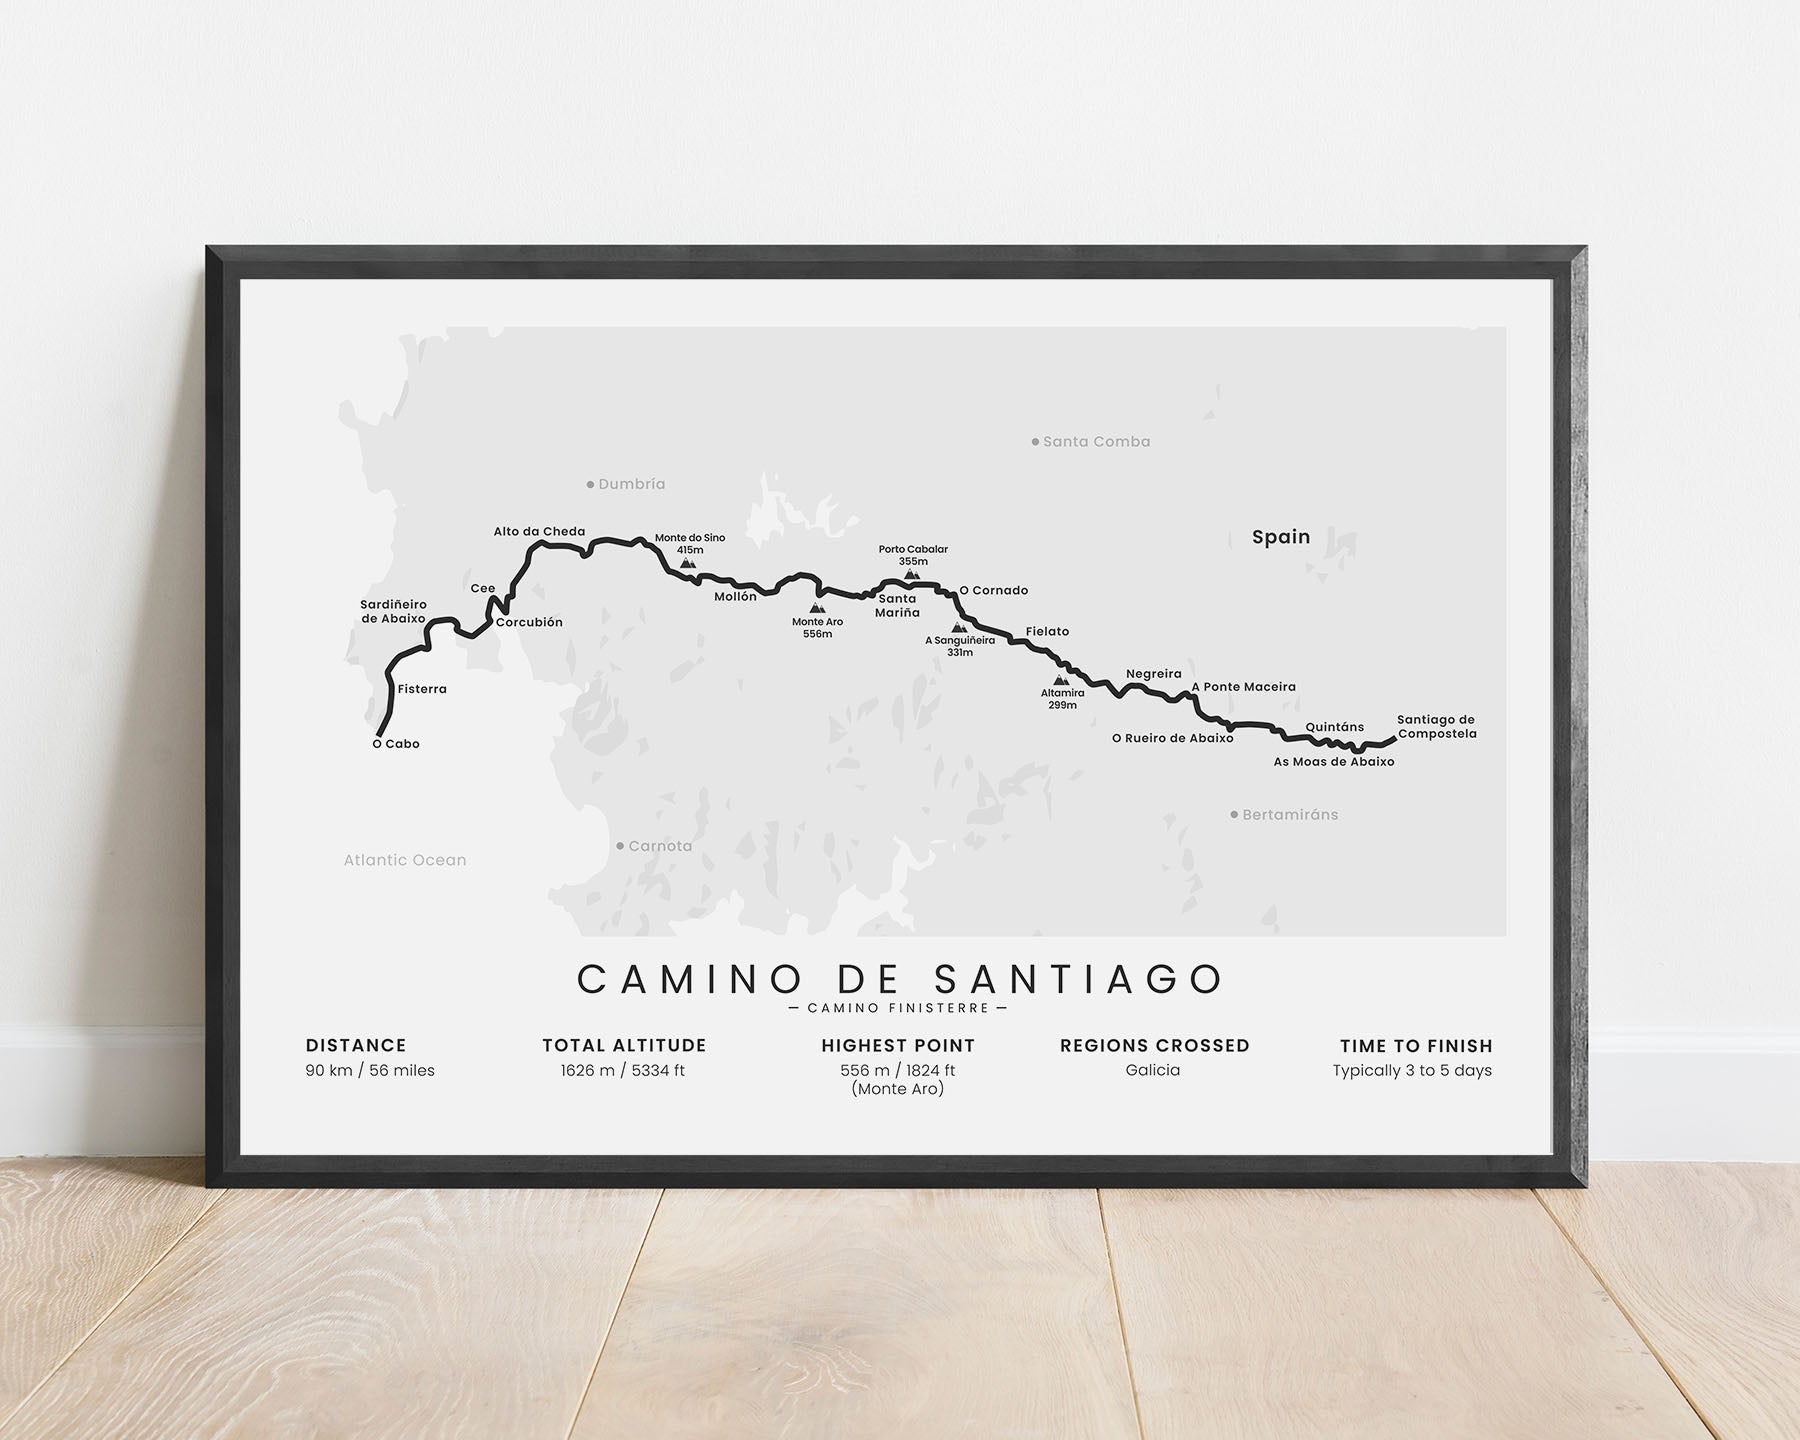 Camino Finisterre (Finisterre to Santiago de Compostela) hike poster art with white background